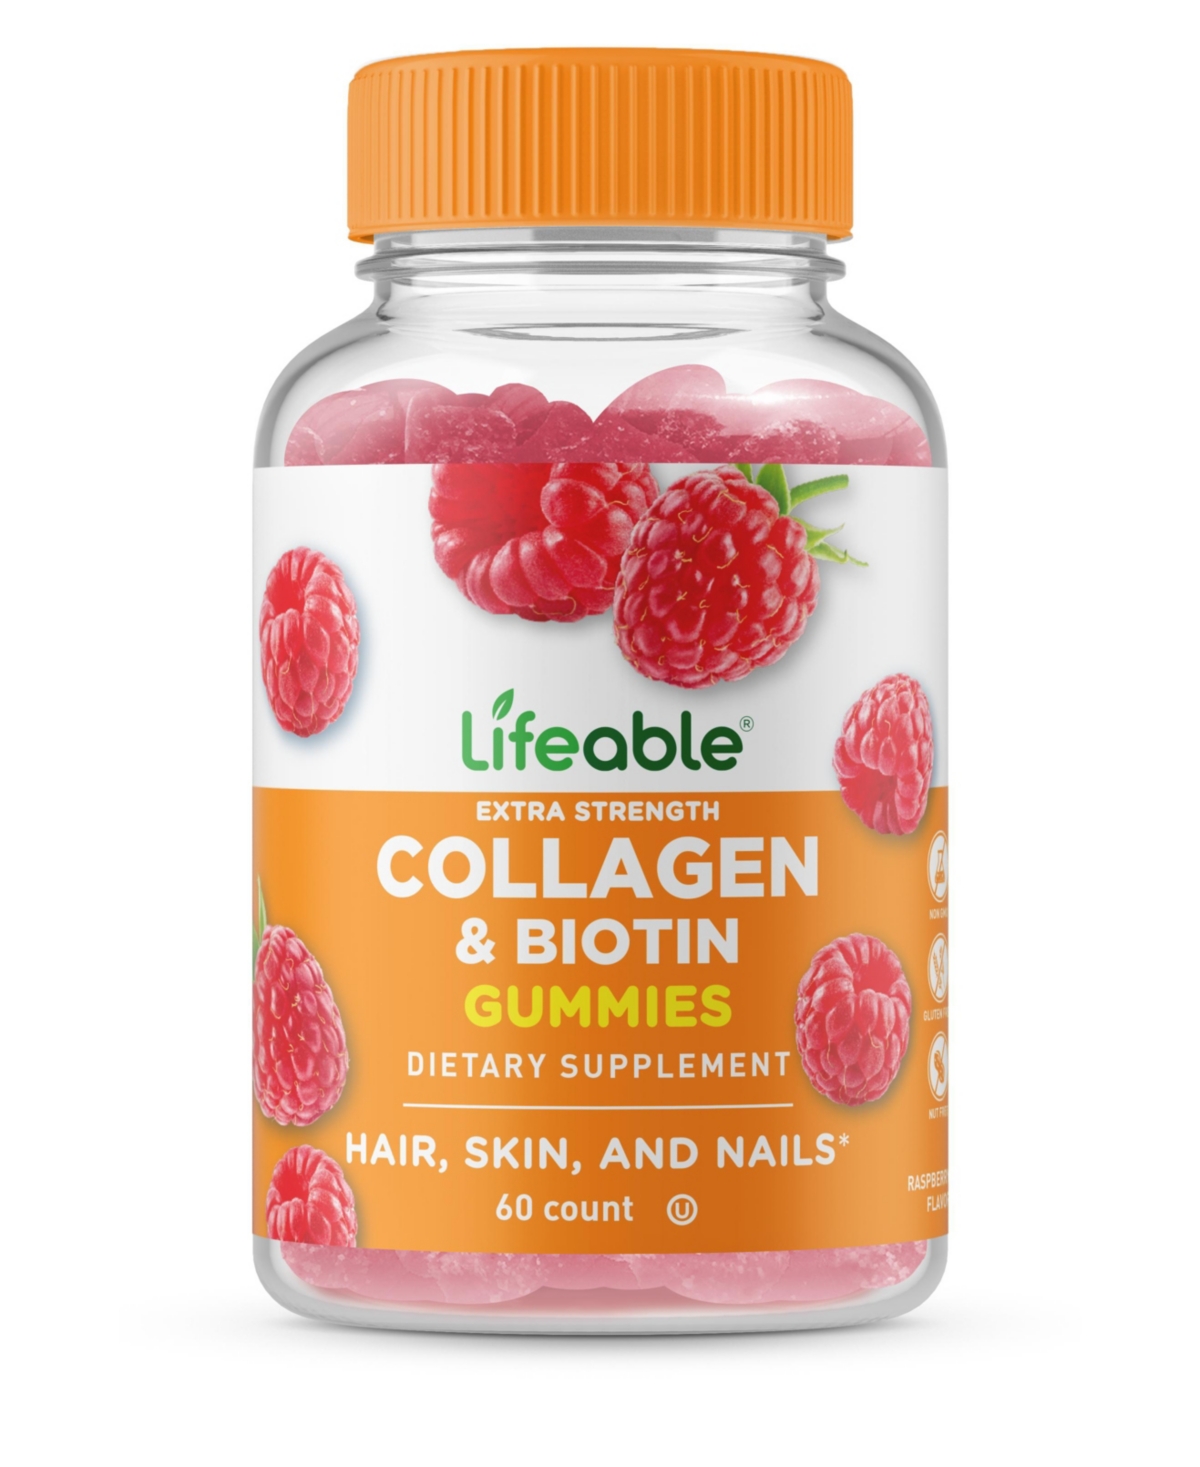 Collagen peptides 100mg with Biotin 10,000mcg Gummies - Hair Skin And Nails Growth - Great Tasting Dietary Supplement Vitamins - 60 Gummies -